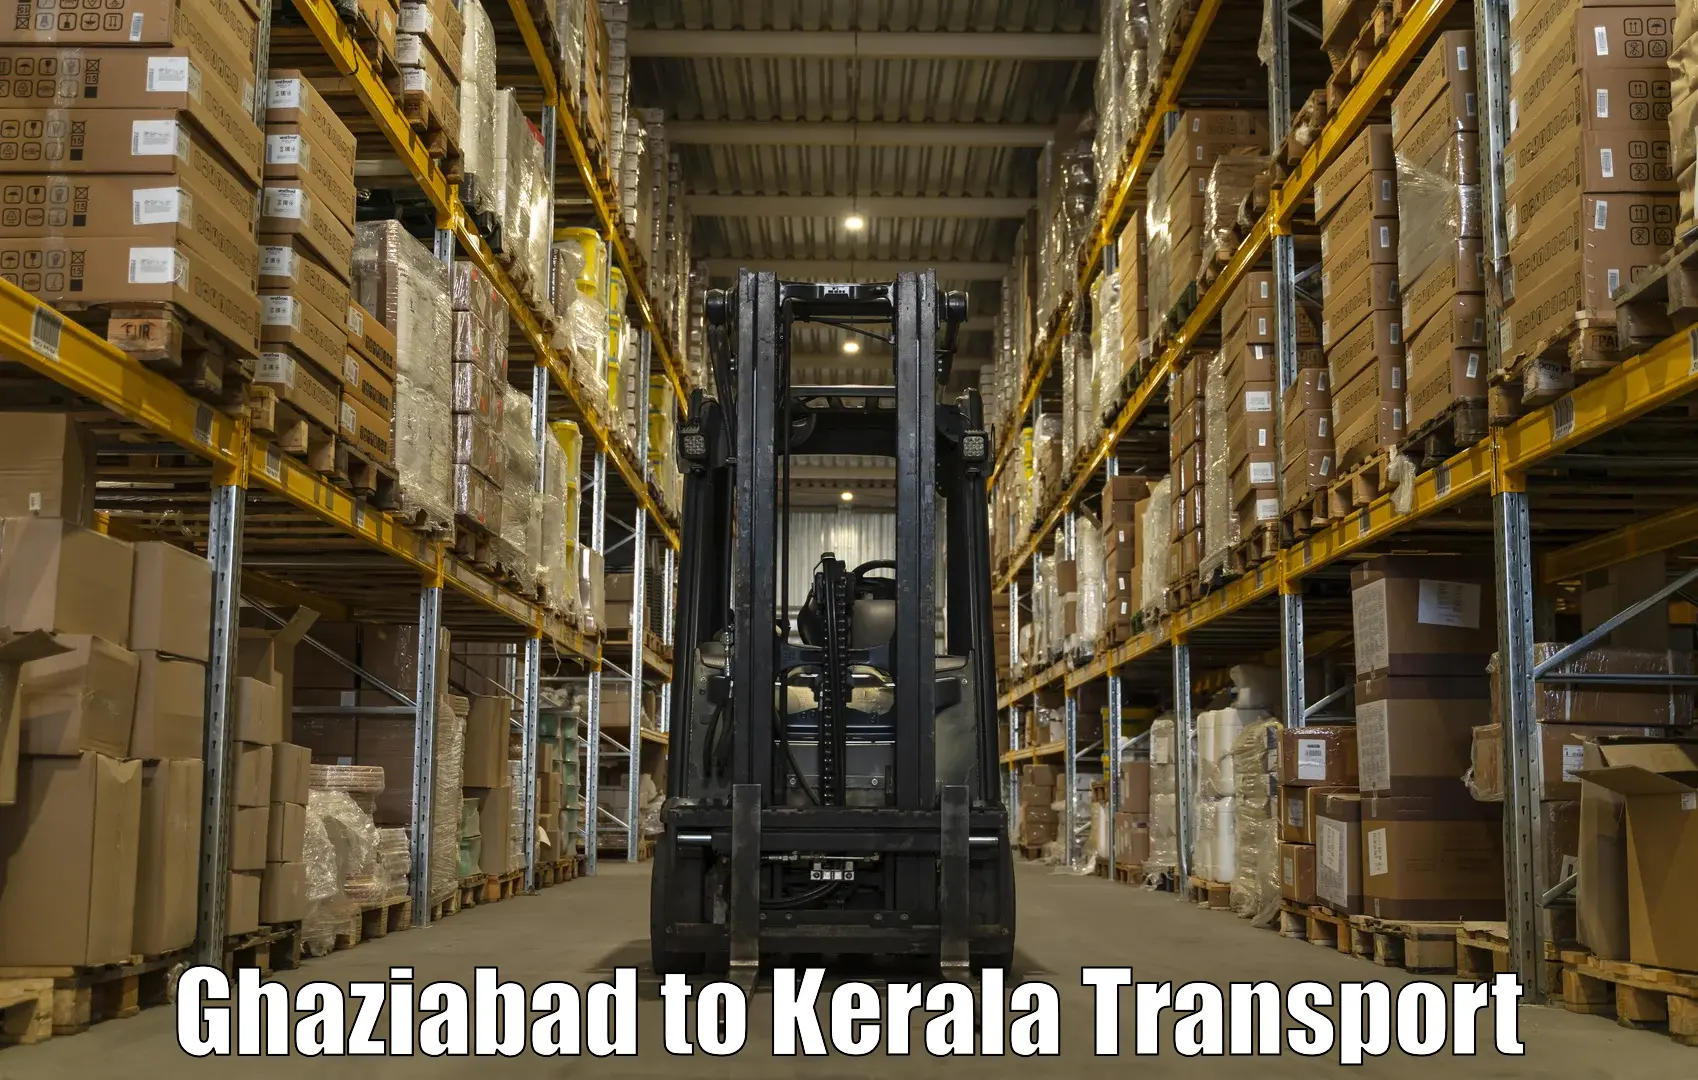 Pick up transport service in Ghaziabad to Trivandrum